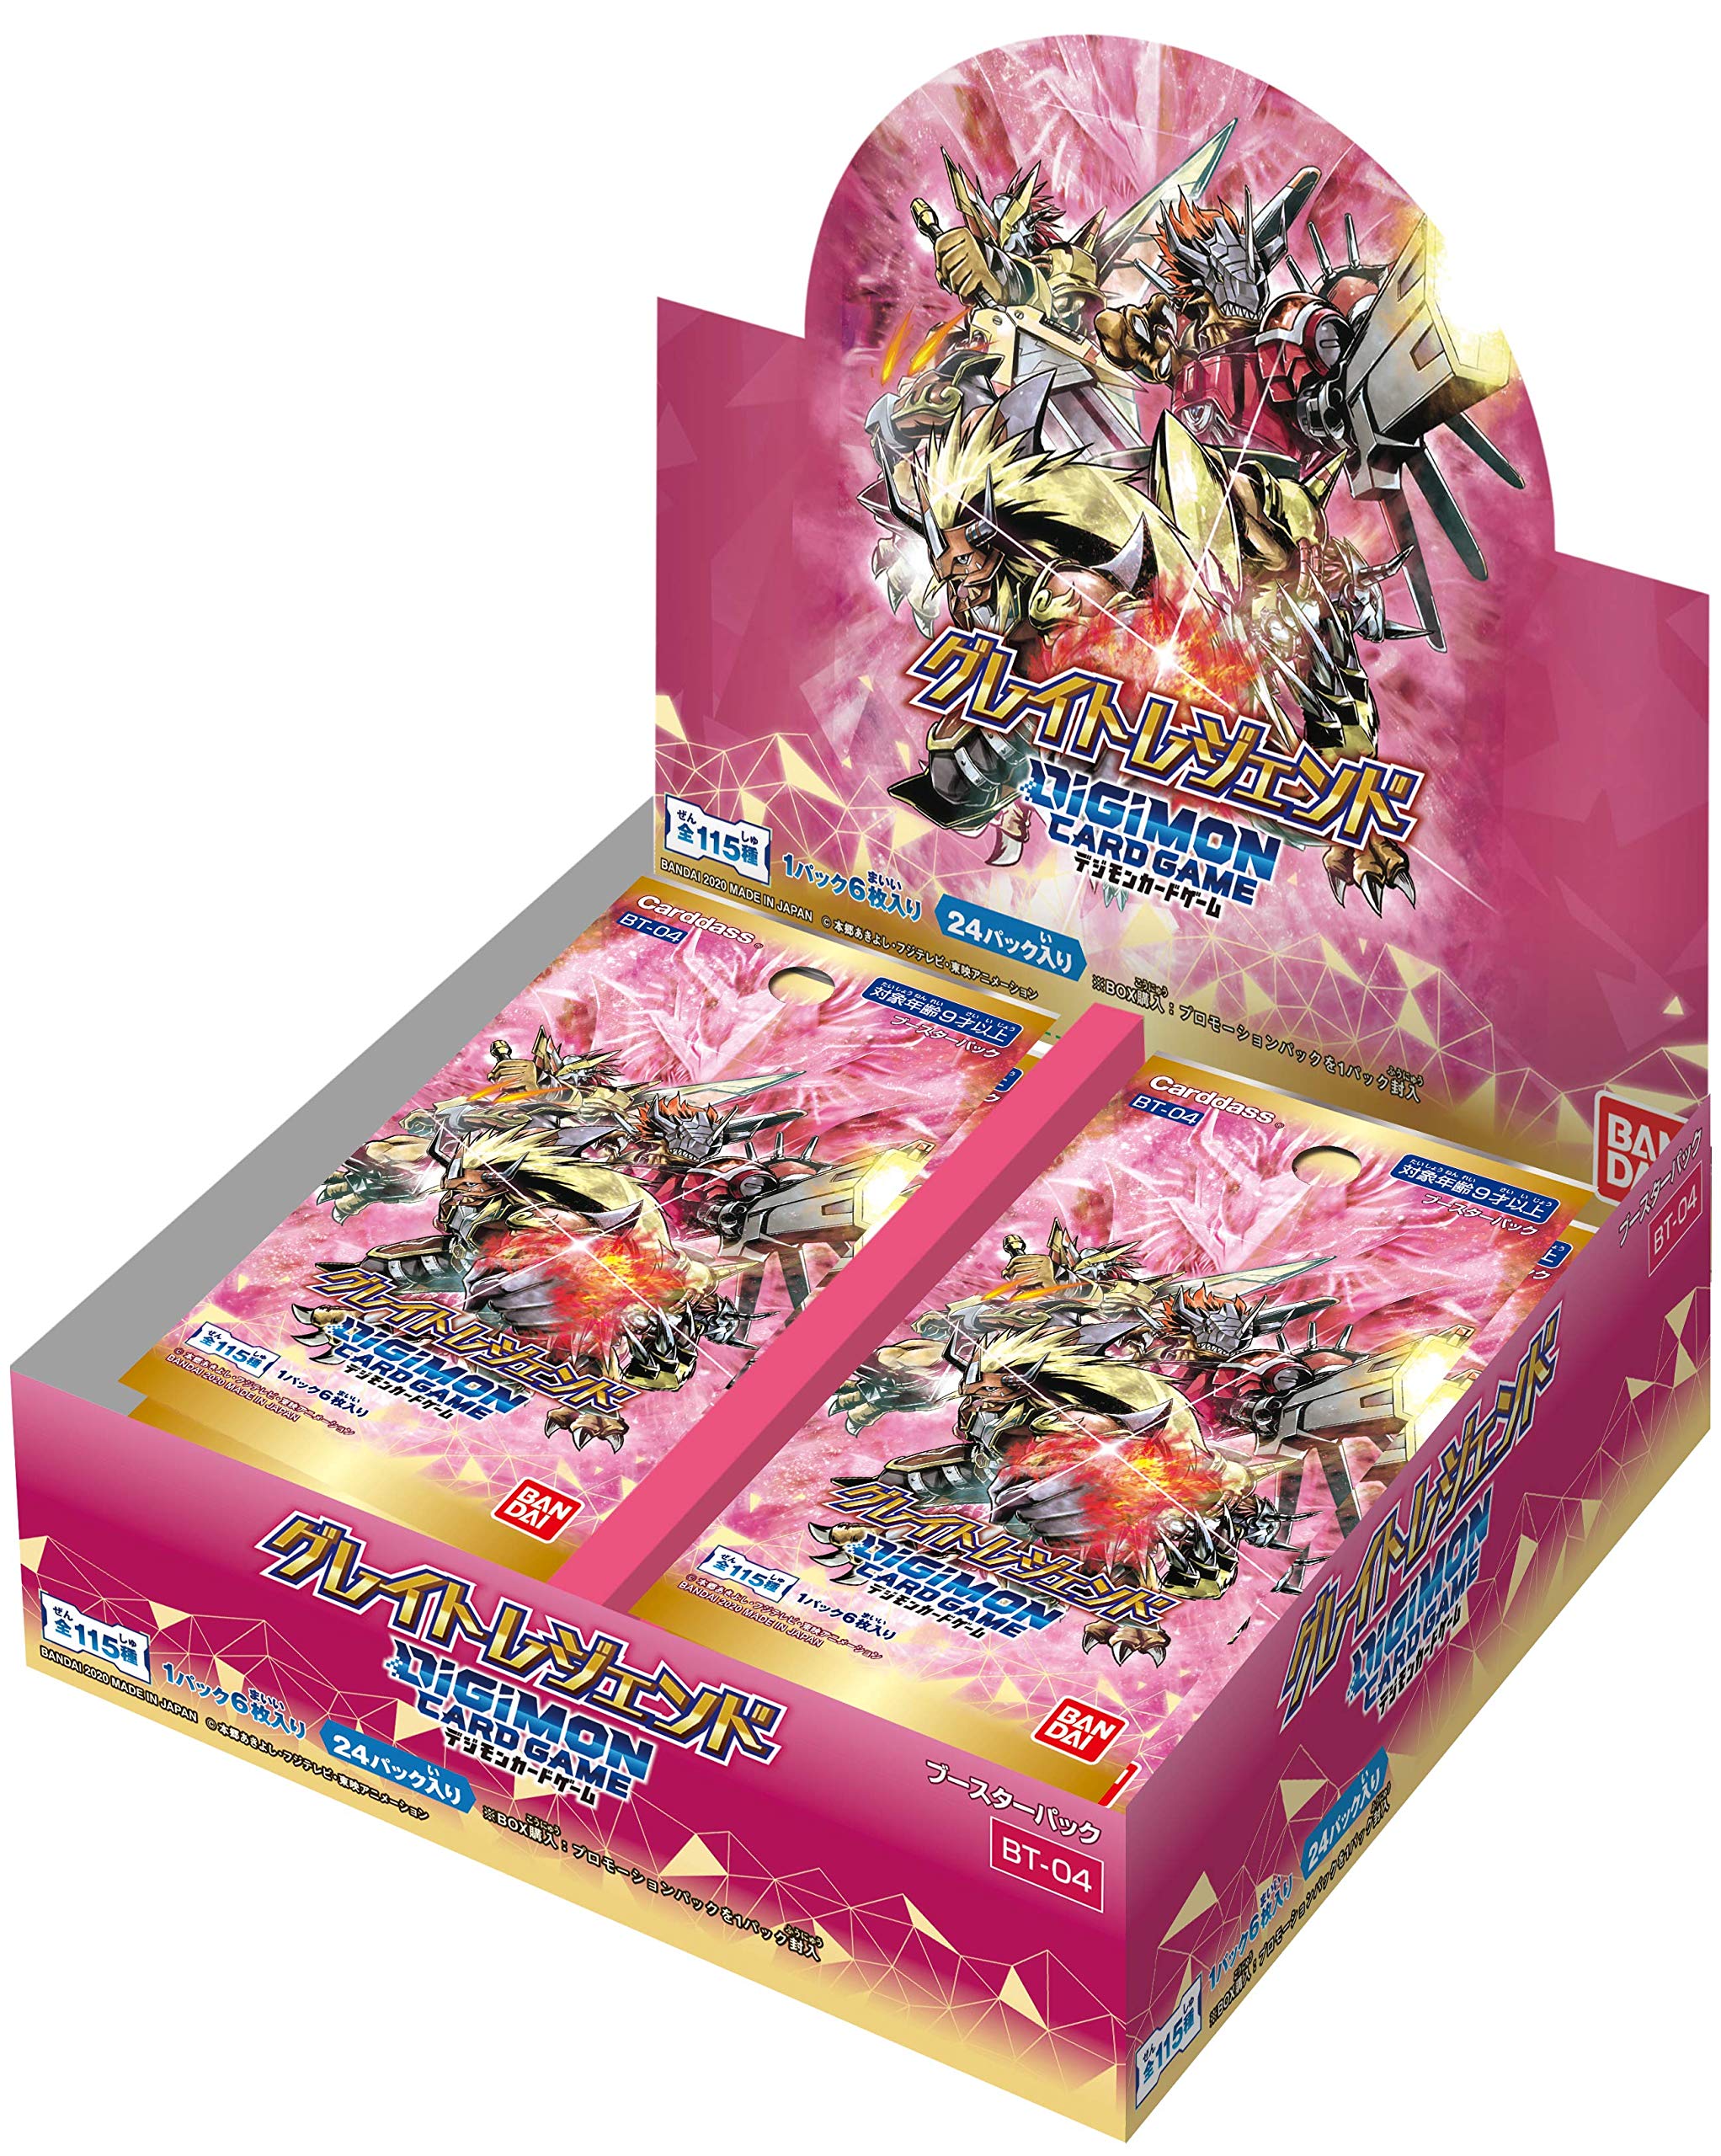 Digimon Card Game Ultimate Power BT02 & Union Impact BT04 Booster Packs 